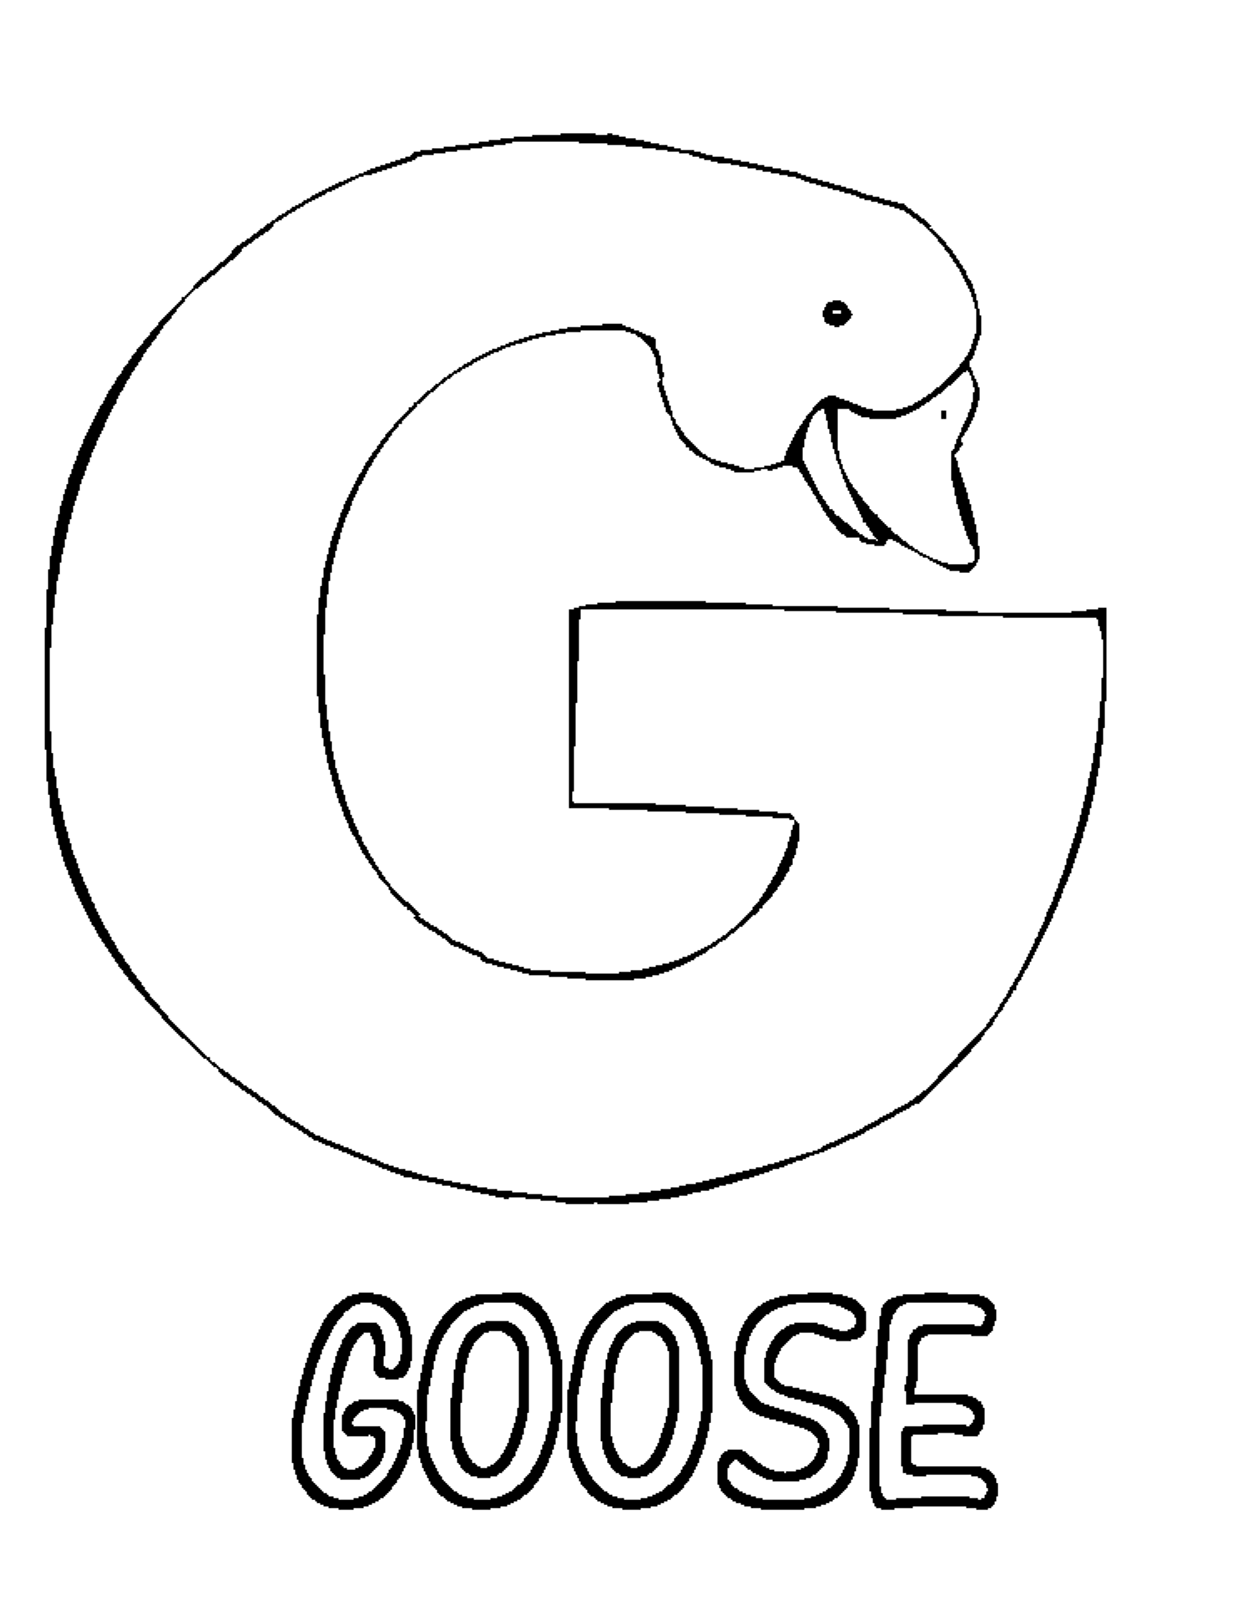 G Coloring Pages Preschool - High Quality Coloring Pages